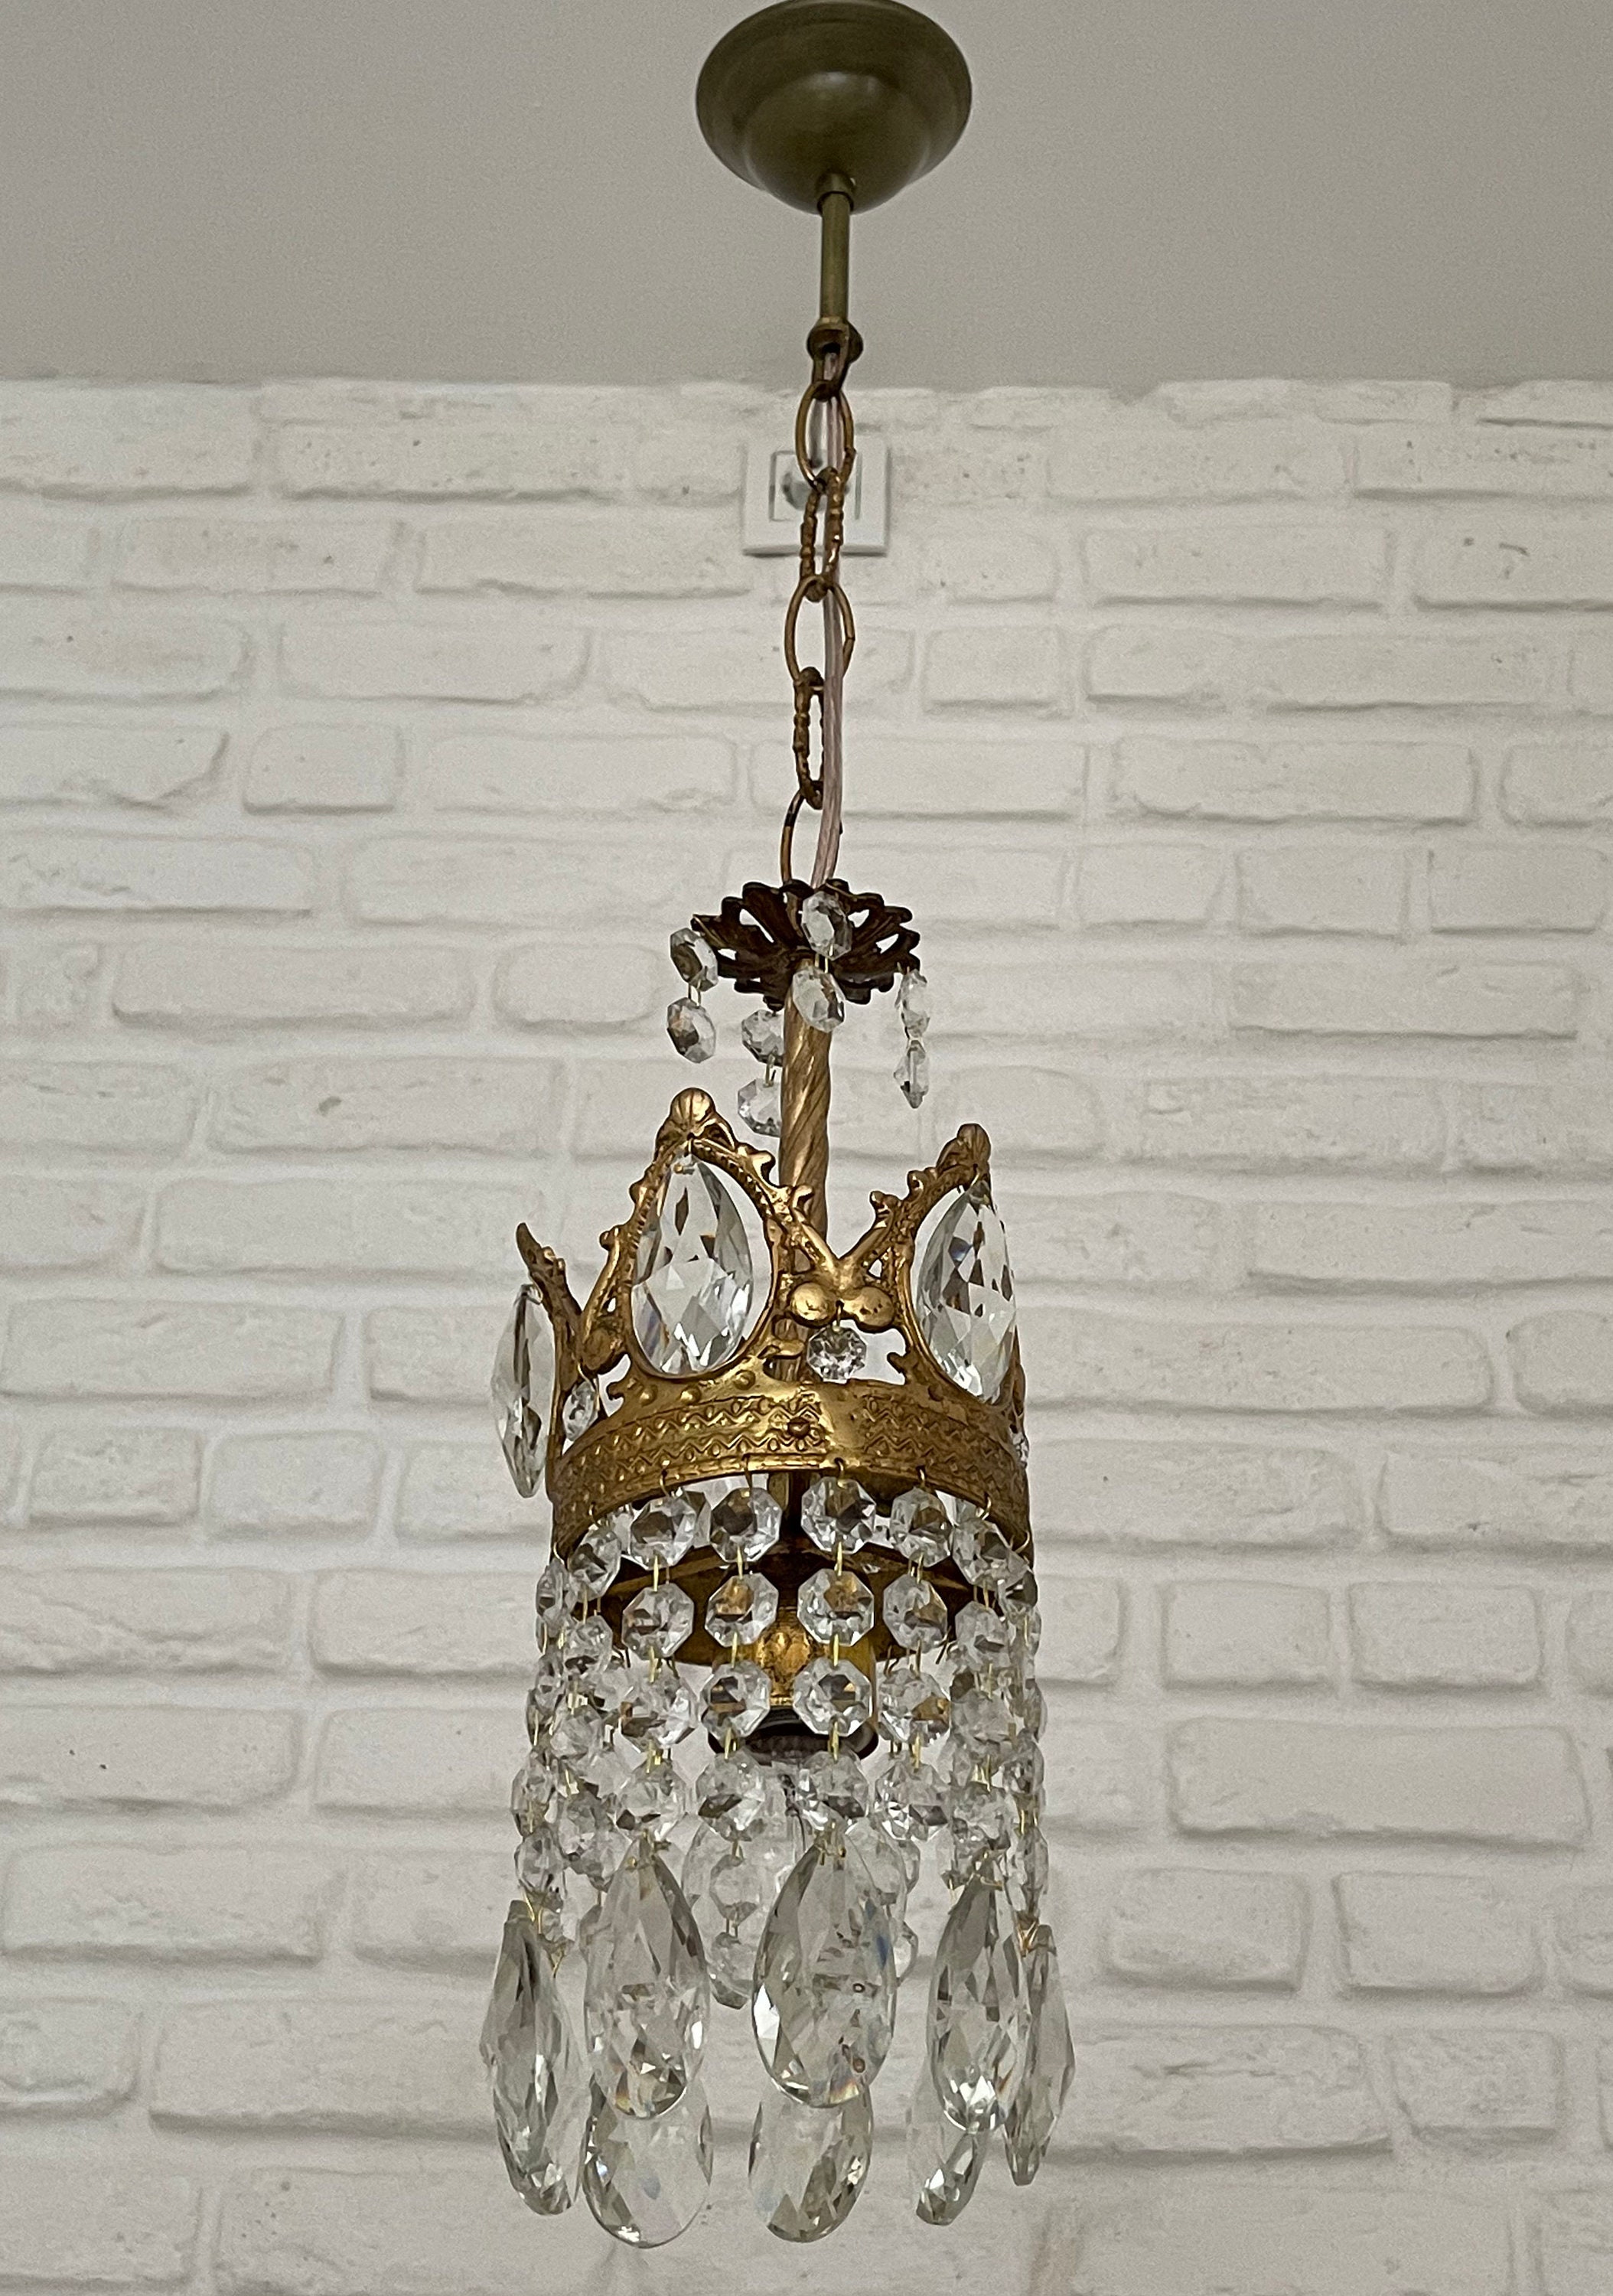 Antique Vintage Brass & Crystals Small Chandelier Ceiling Light Pendant  Lighting Glass Lamp From 1950's -  Canada